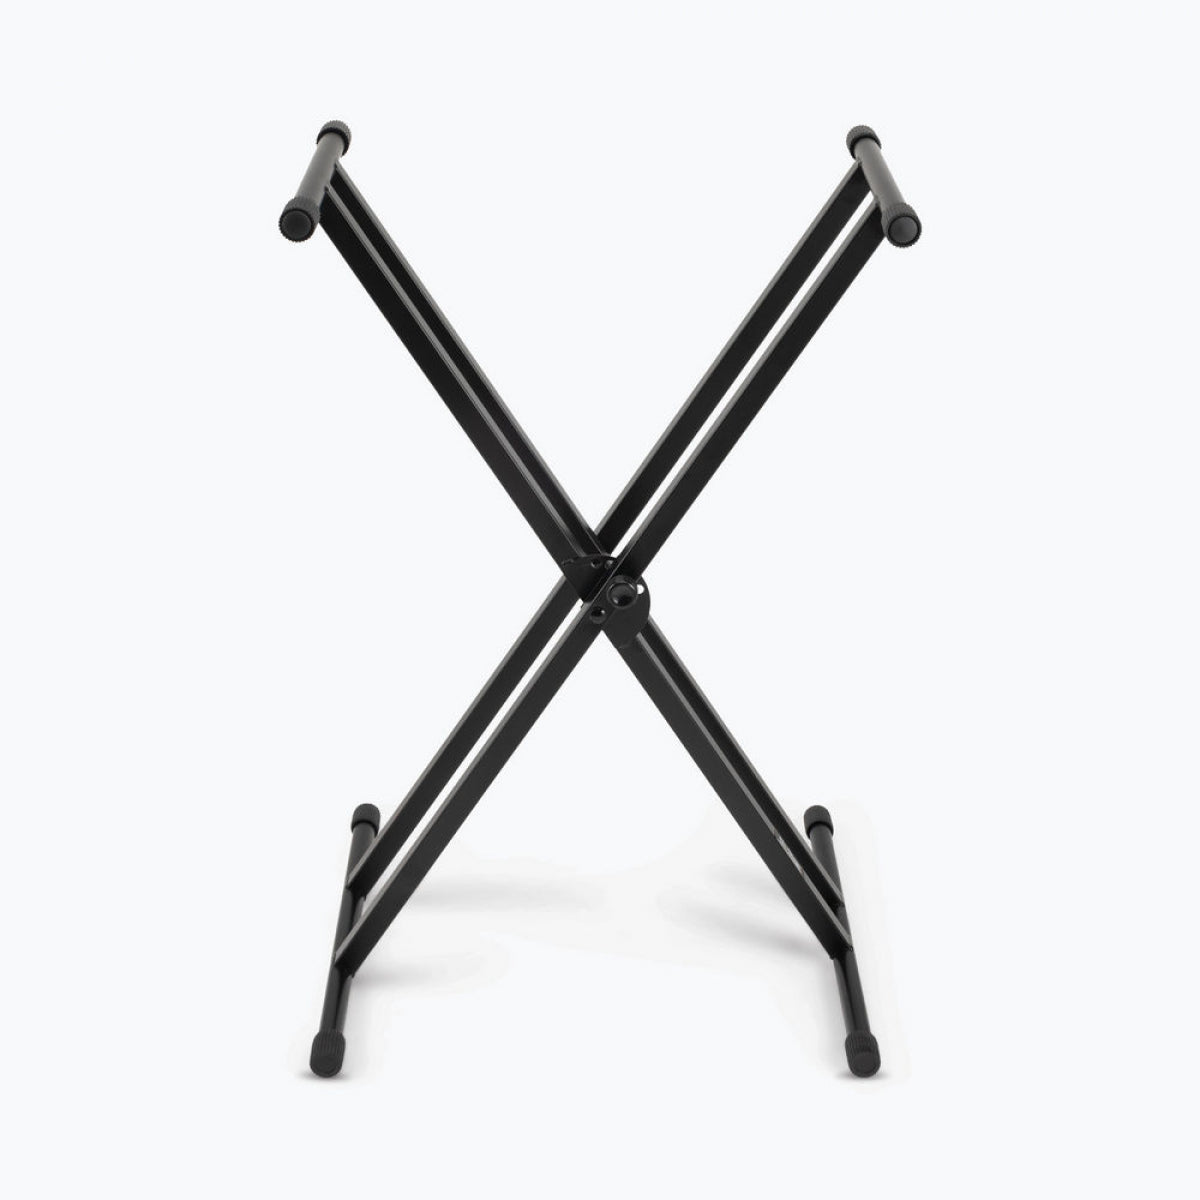 On-Stage KS7191 Double-X Keyboard Stand